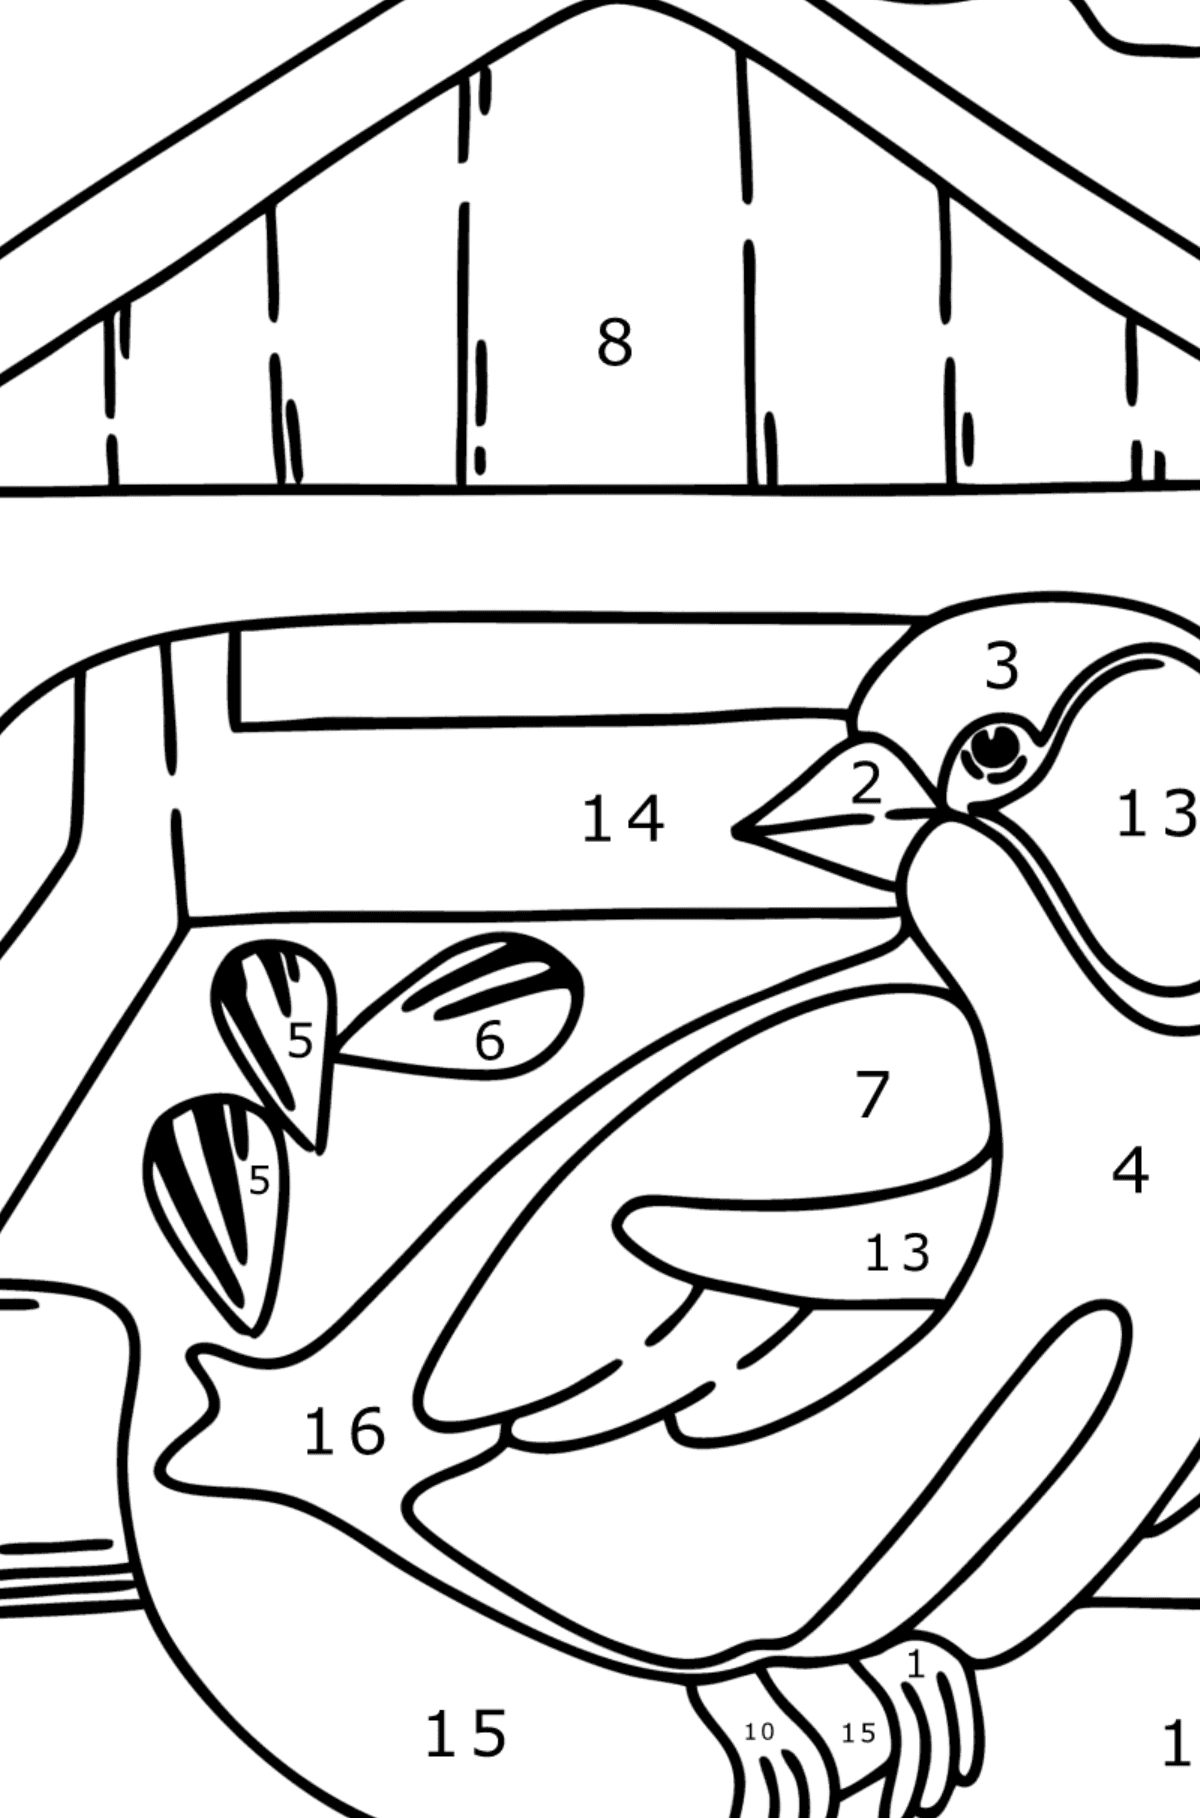 Coloring page - Bird feeder - Coloring by Numbers for Kids